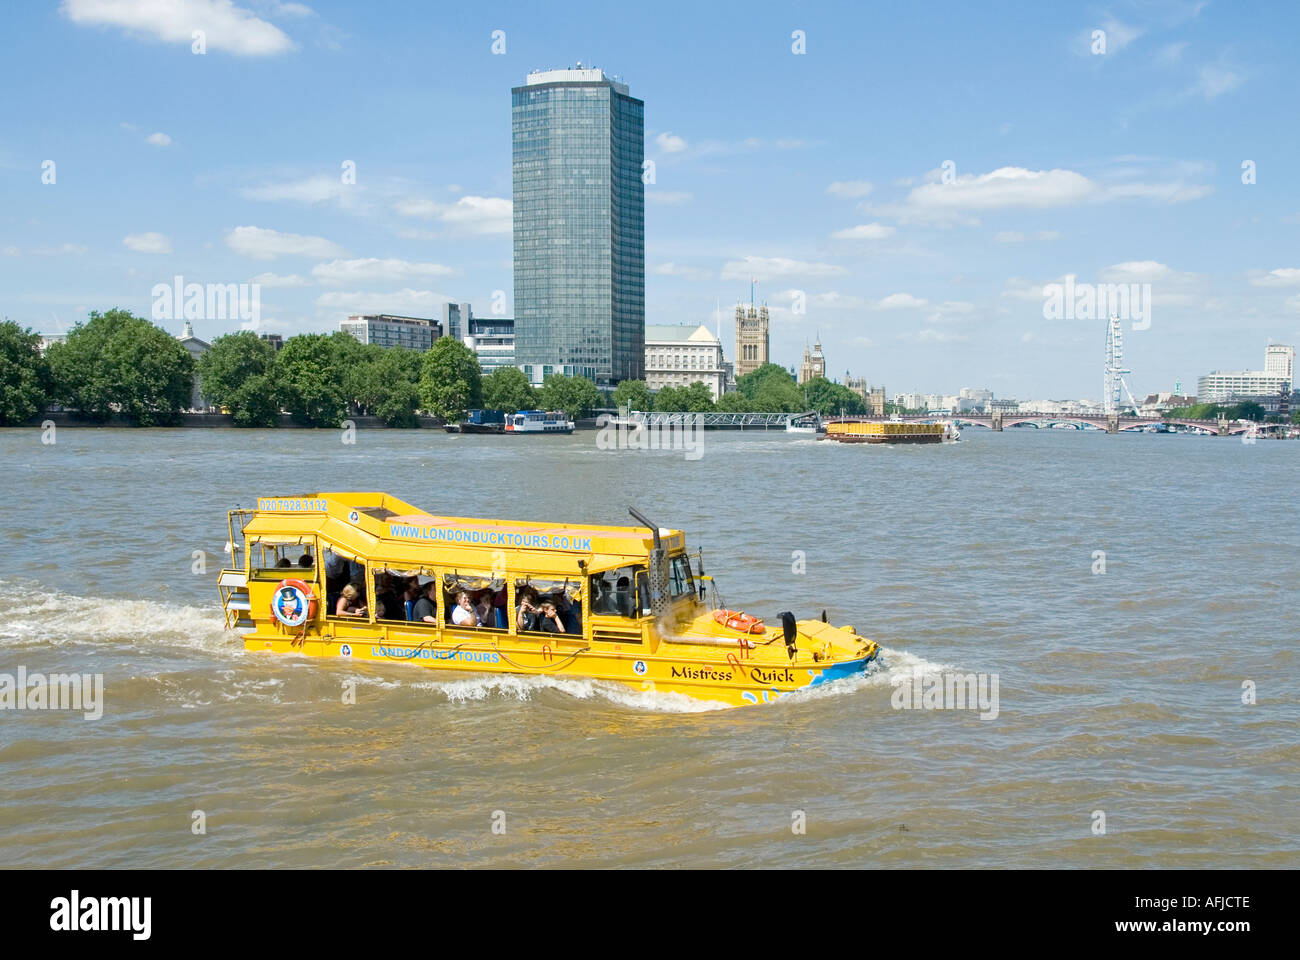 Group of people amphibious transport sightseeing tour boat for tourist travel on River Thames Millbank skyscraper landmark London tourism England UK Stock Photo